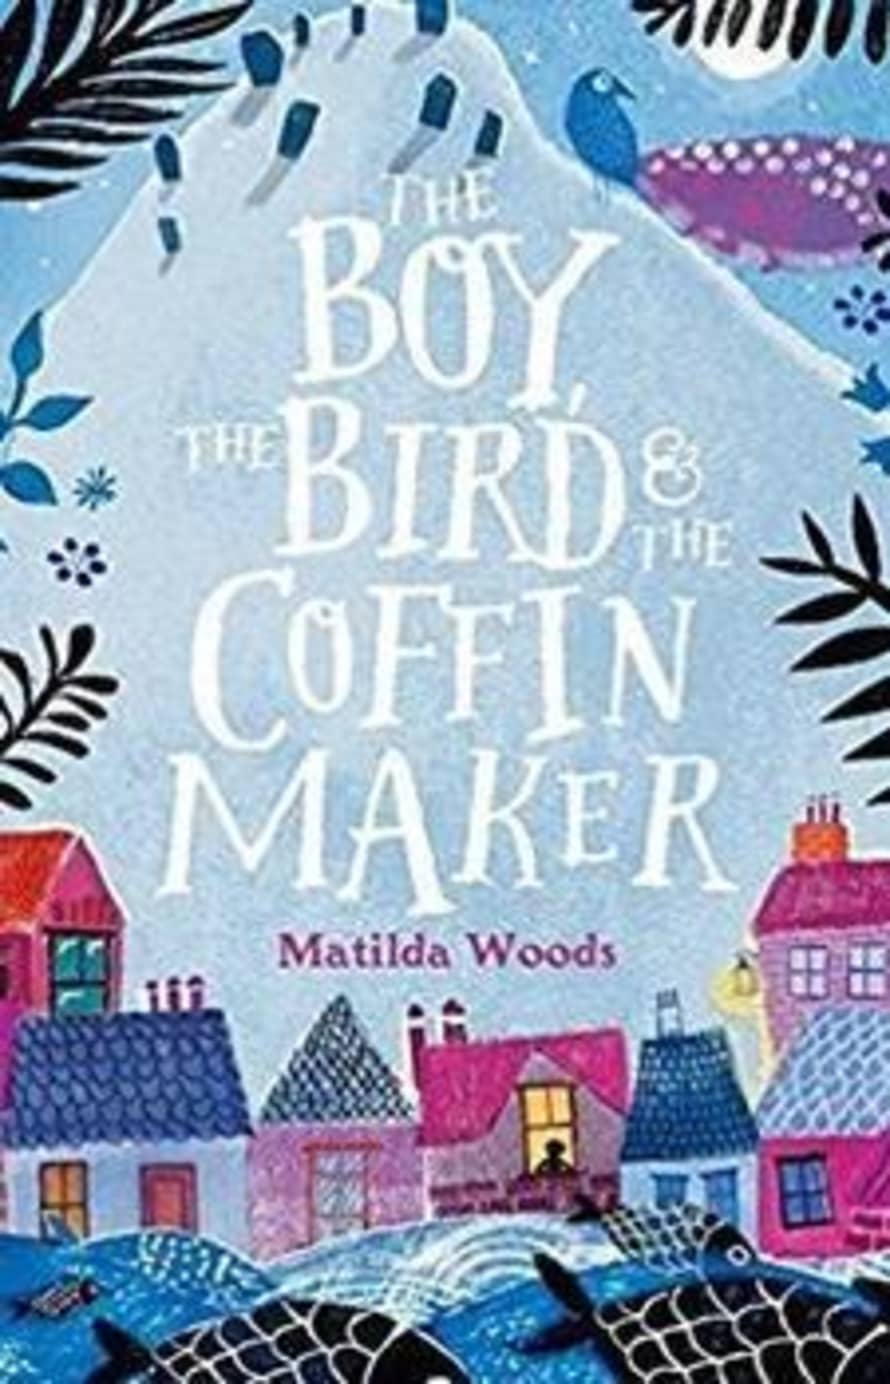 ottie and the bea The Boy The Bird and The Coffin Maker Book by Matilda Woods